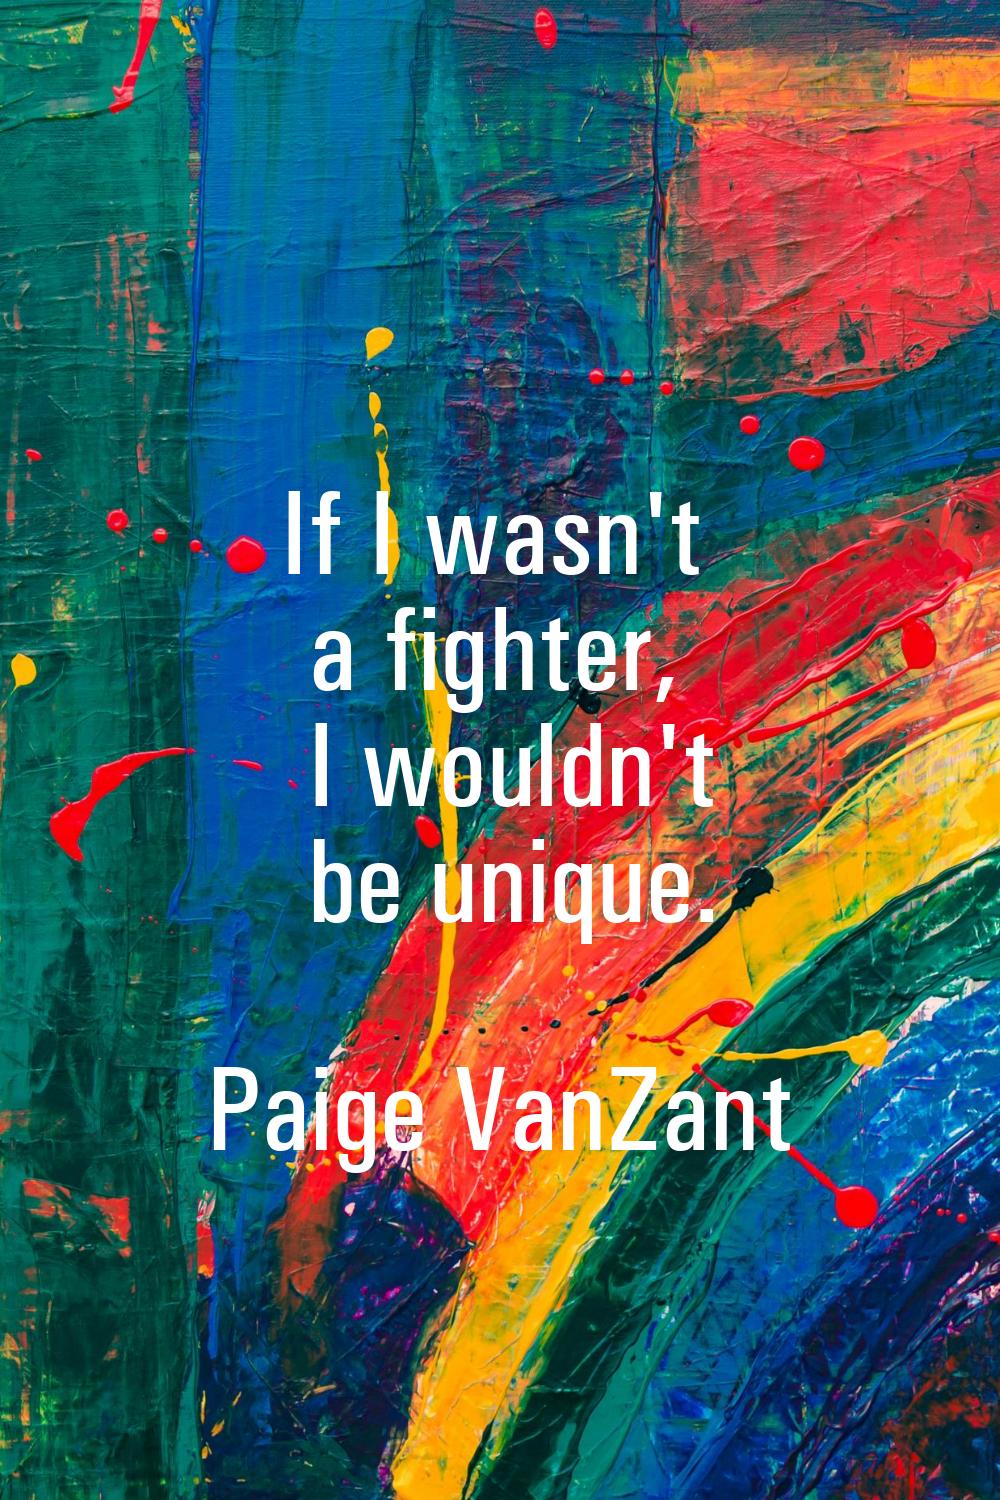 If I wasn't a fighter, I wouldn't be unique.